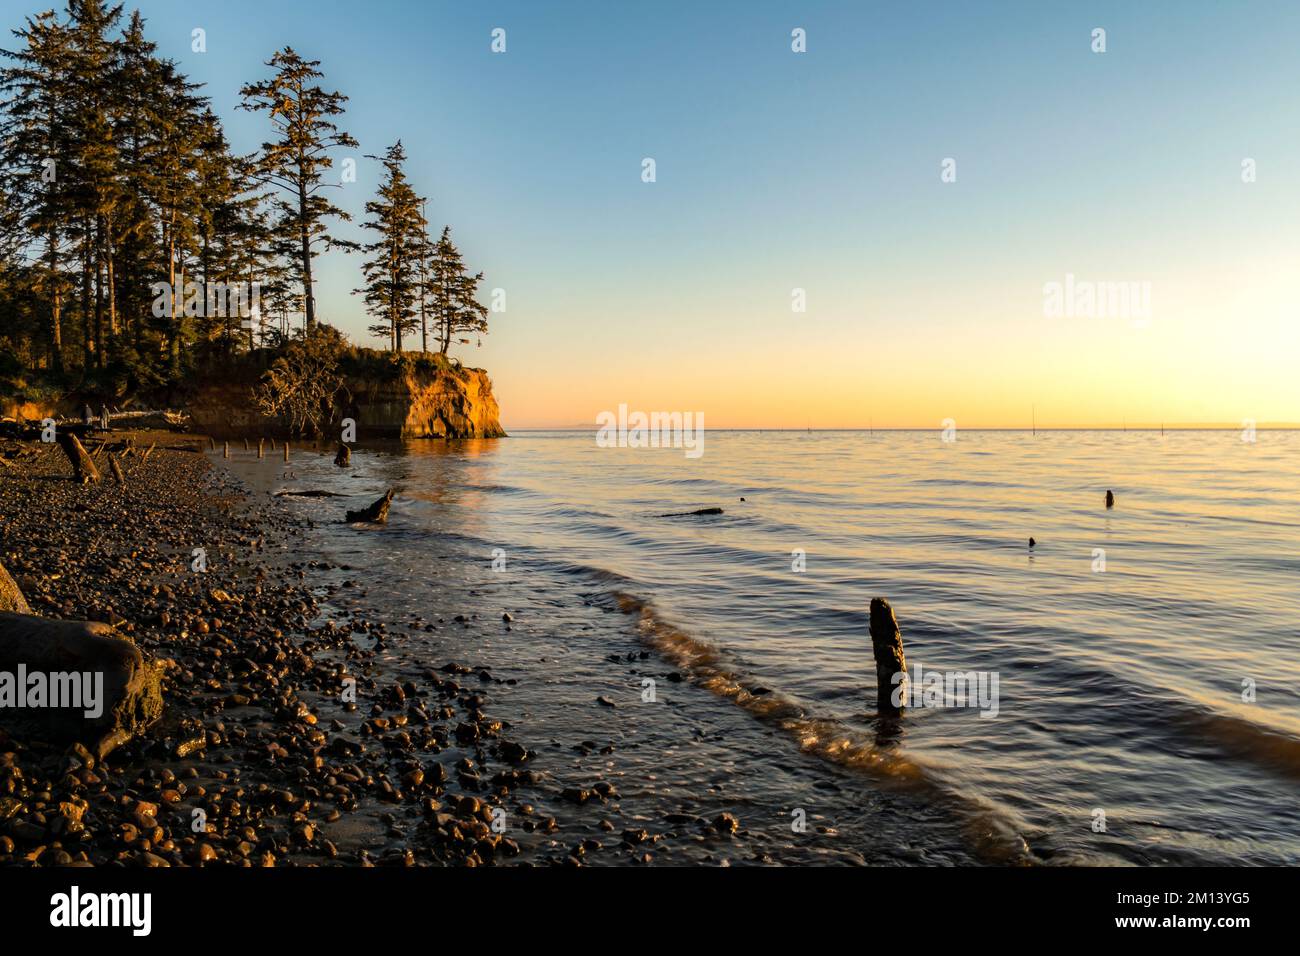 Evening in cove in the Pacific Ocean Stock Photo